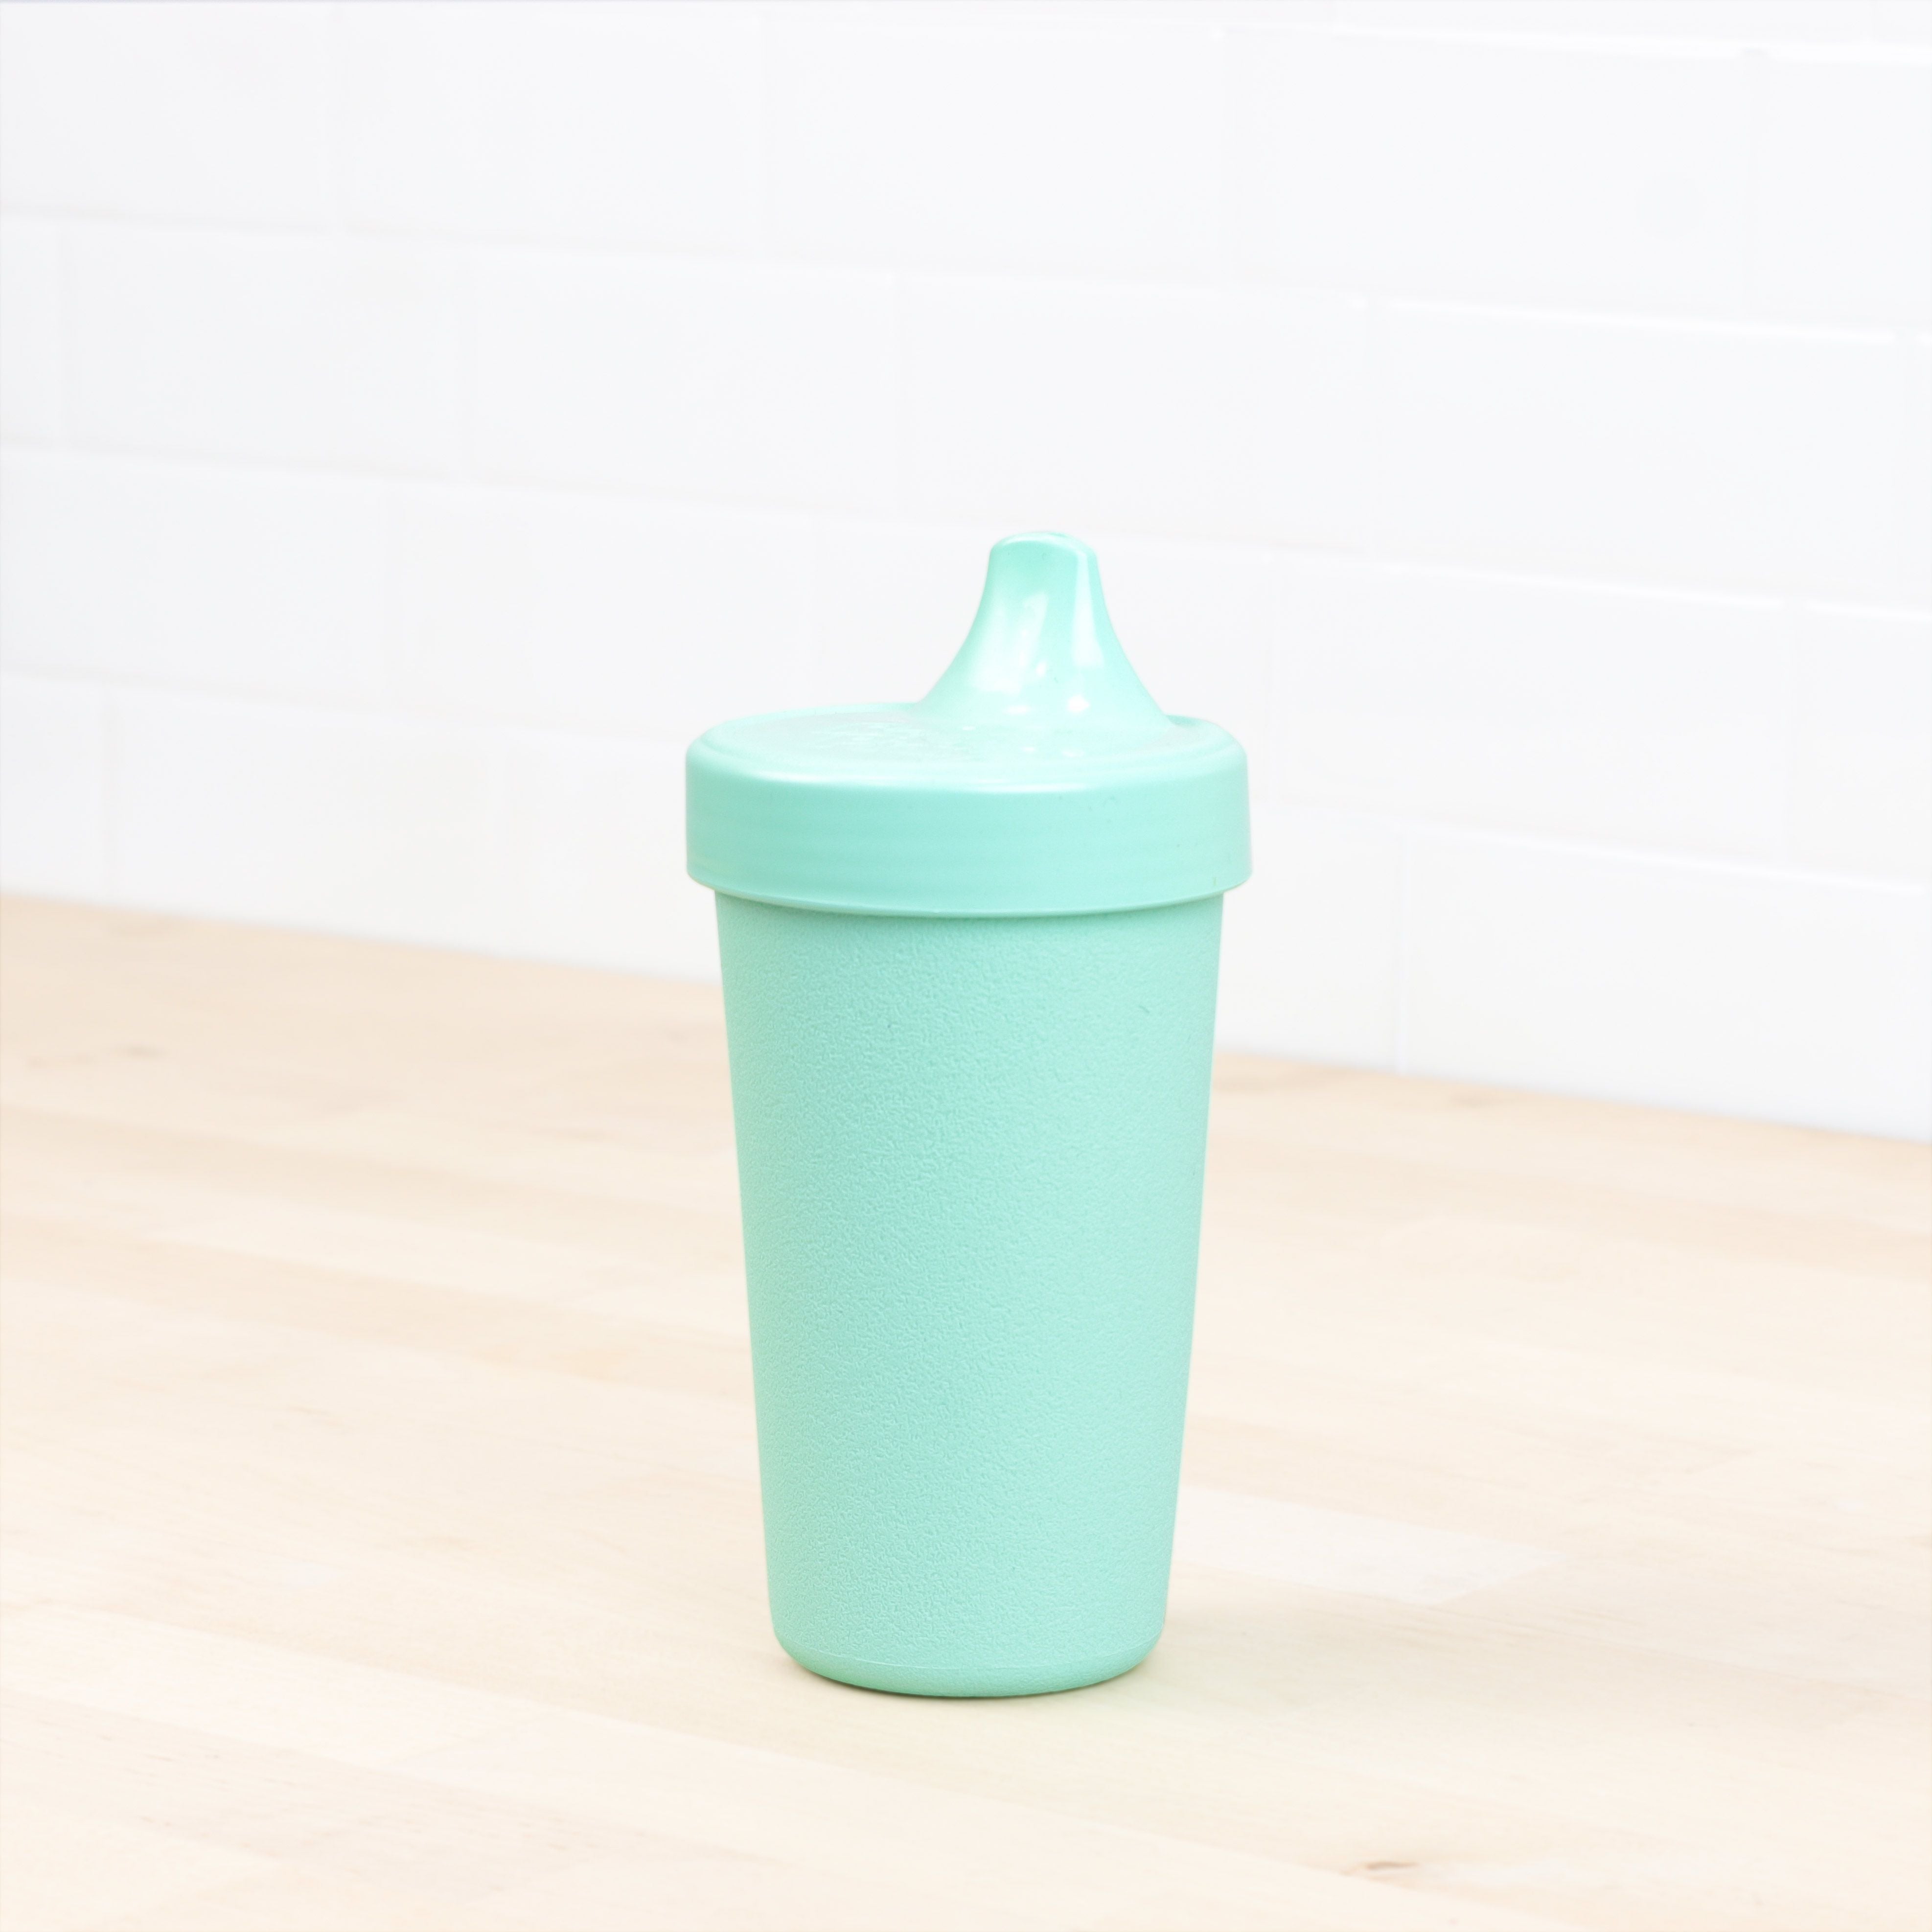 Re-Play No-Spill Sippy Cup Set, Family Tableware Made in the USA from  Recycled Plastic